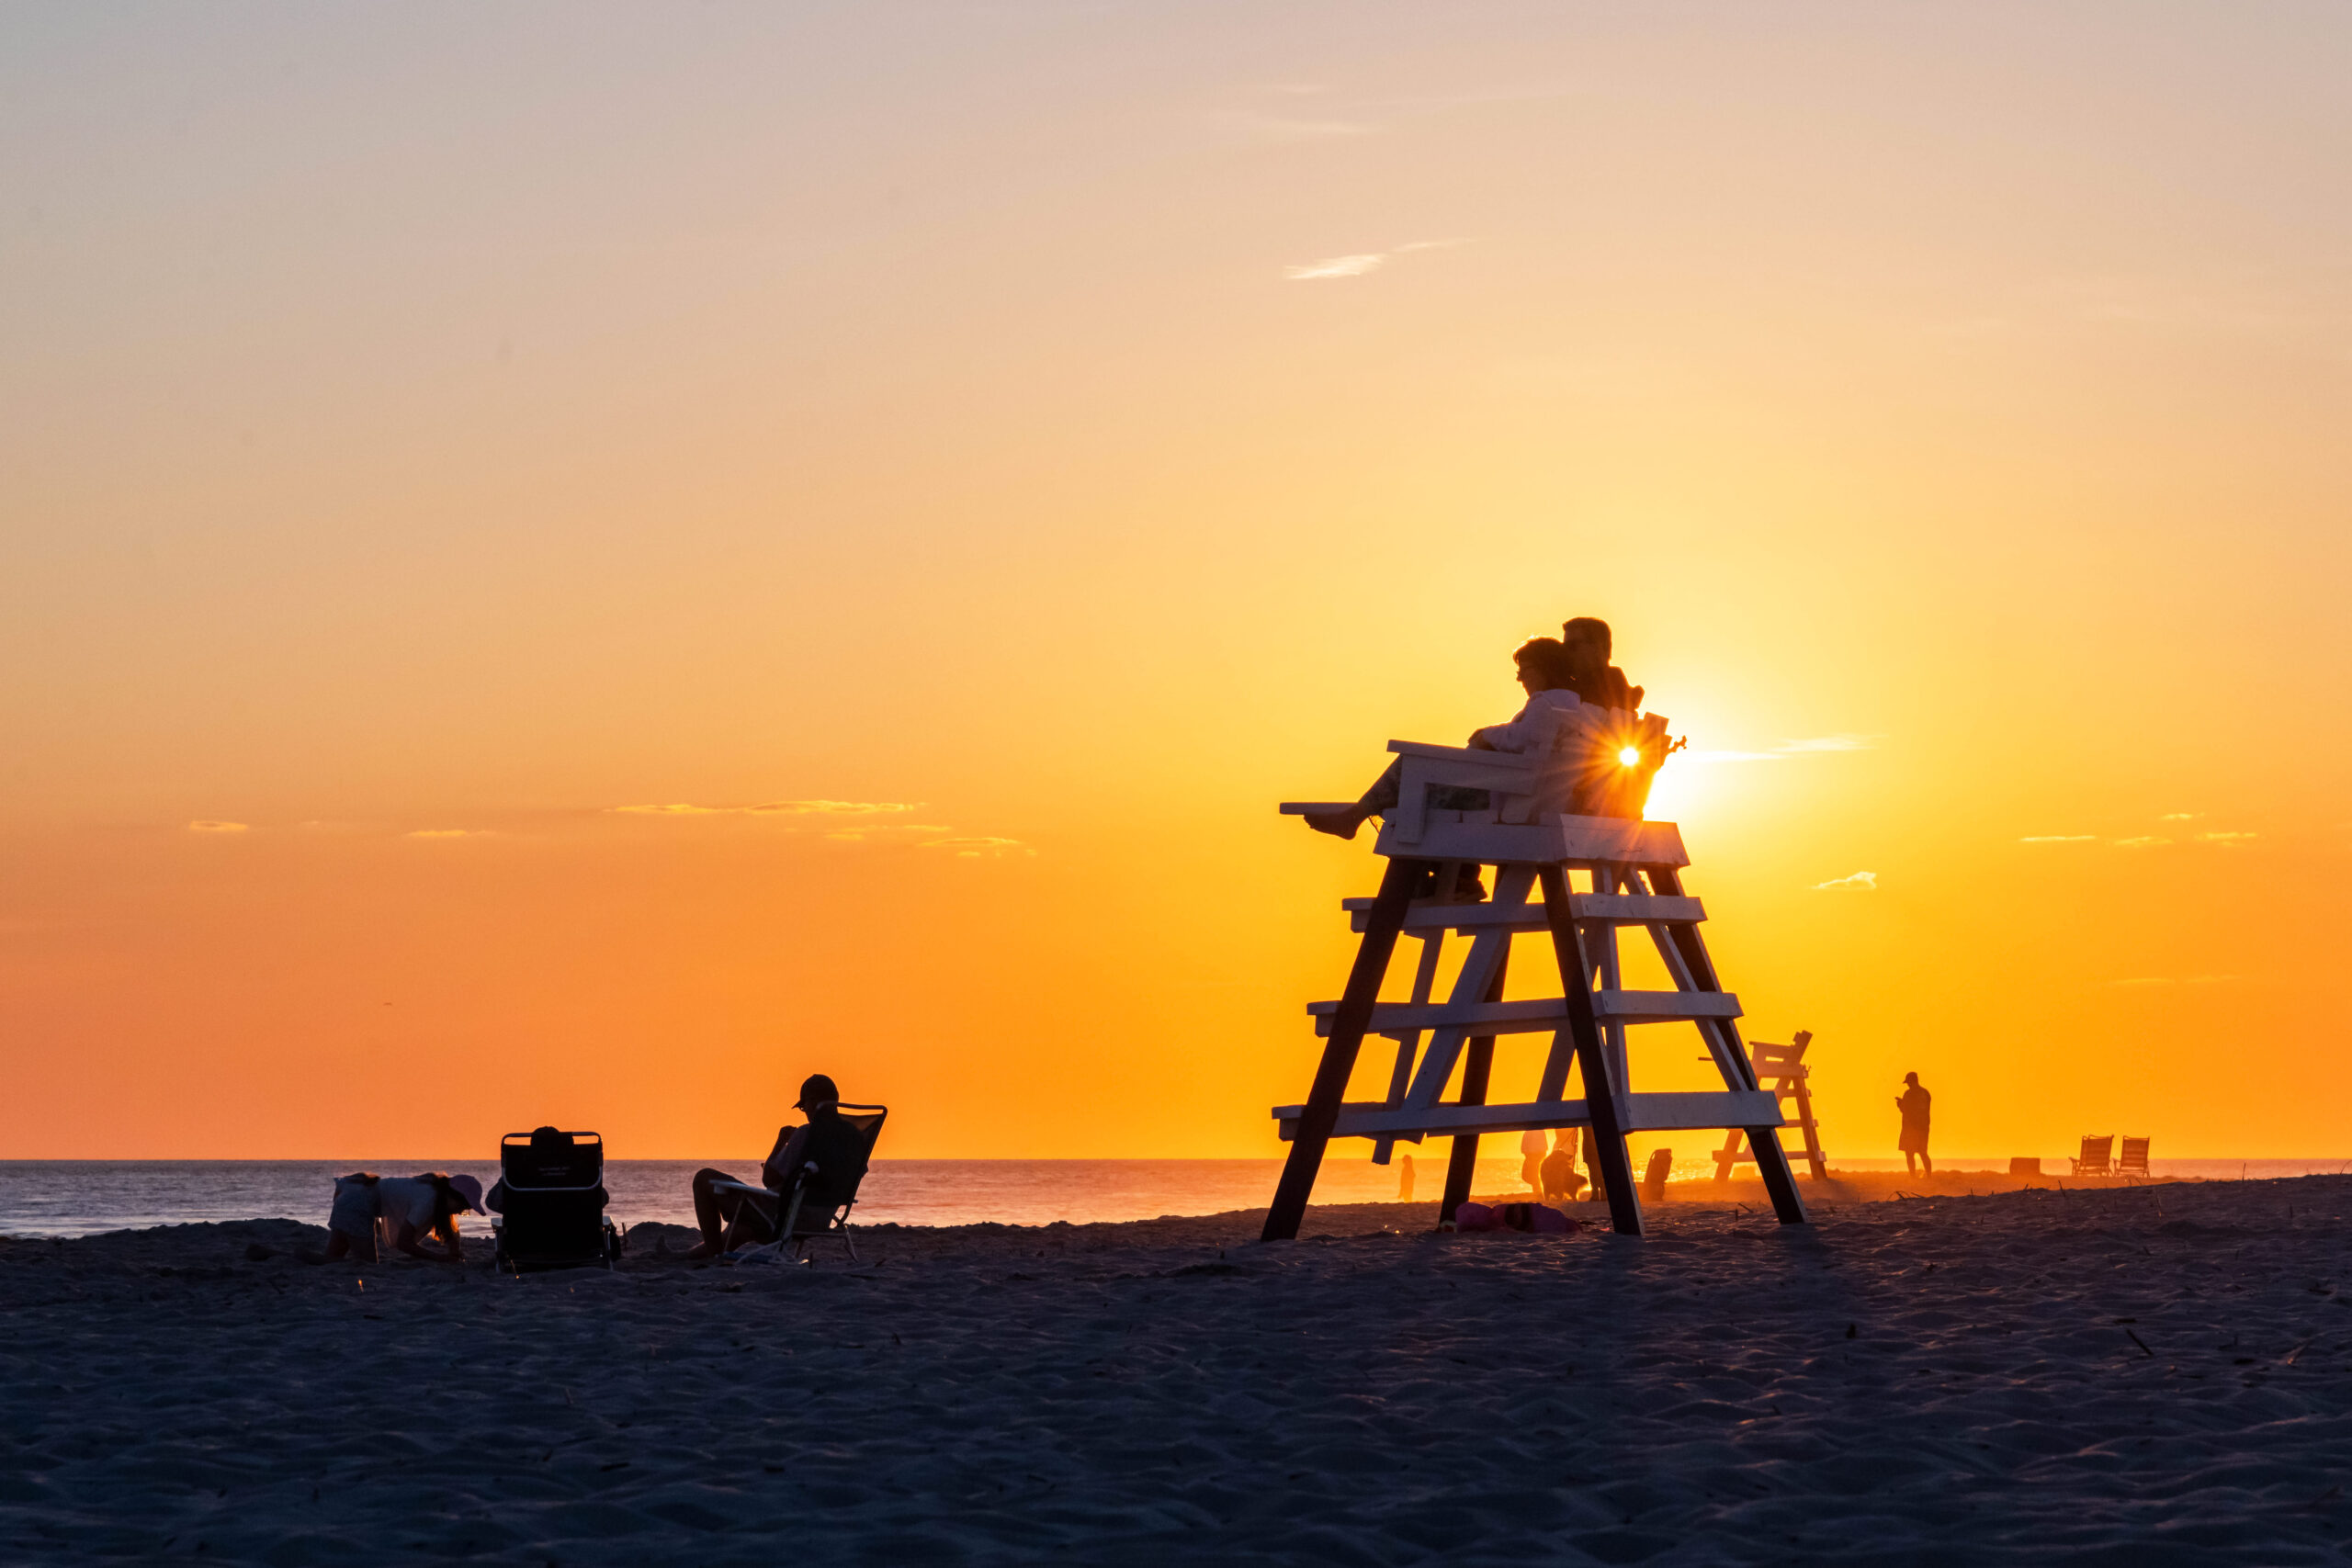 The sun setting directly behind two people sitting on a lifeguard stand. Other groups are sitting on the beach, and people are watching sunset in the distance